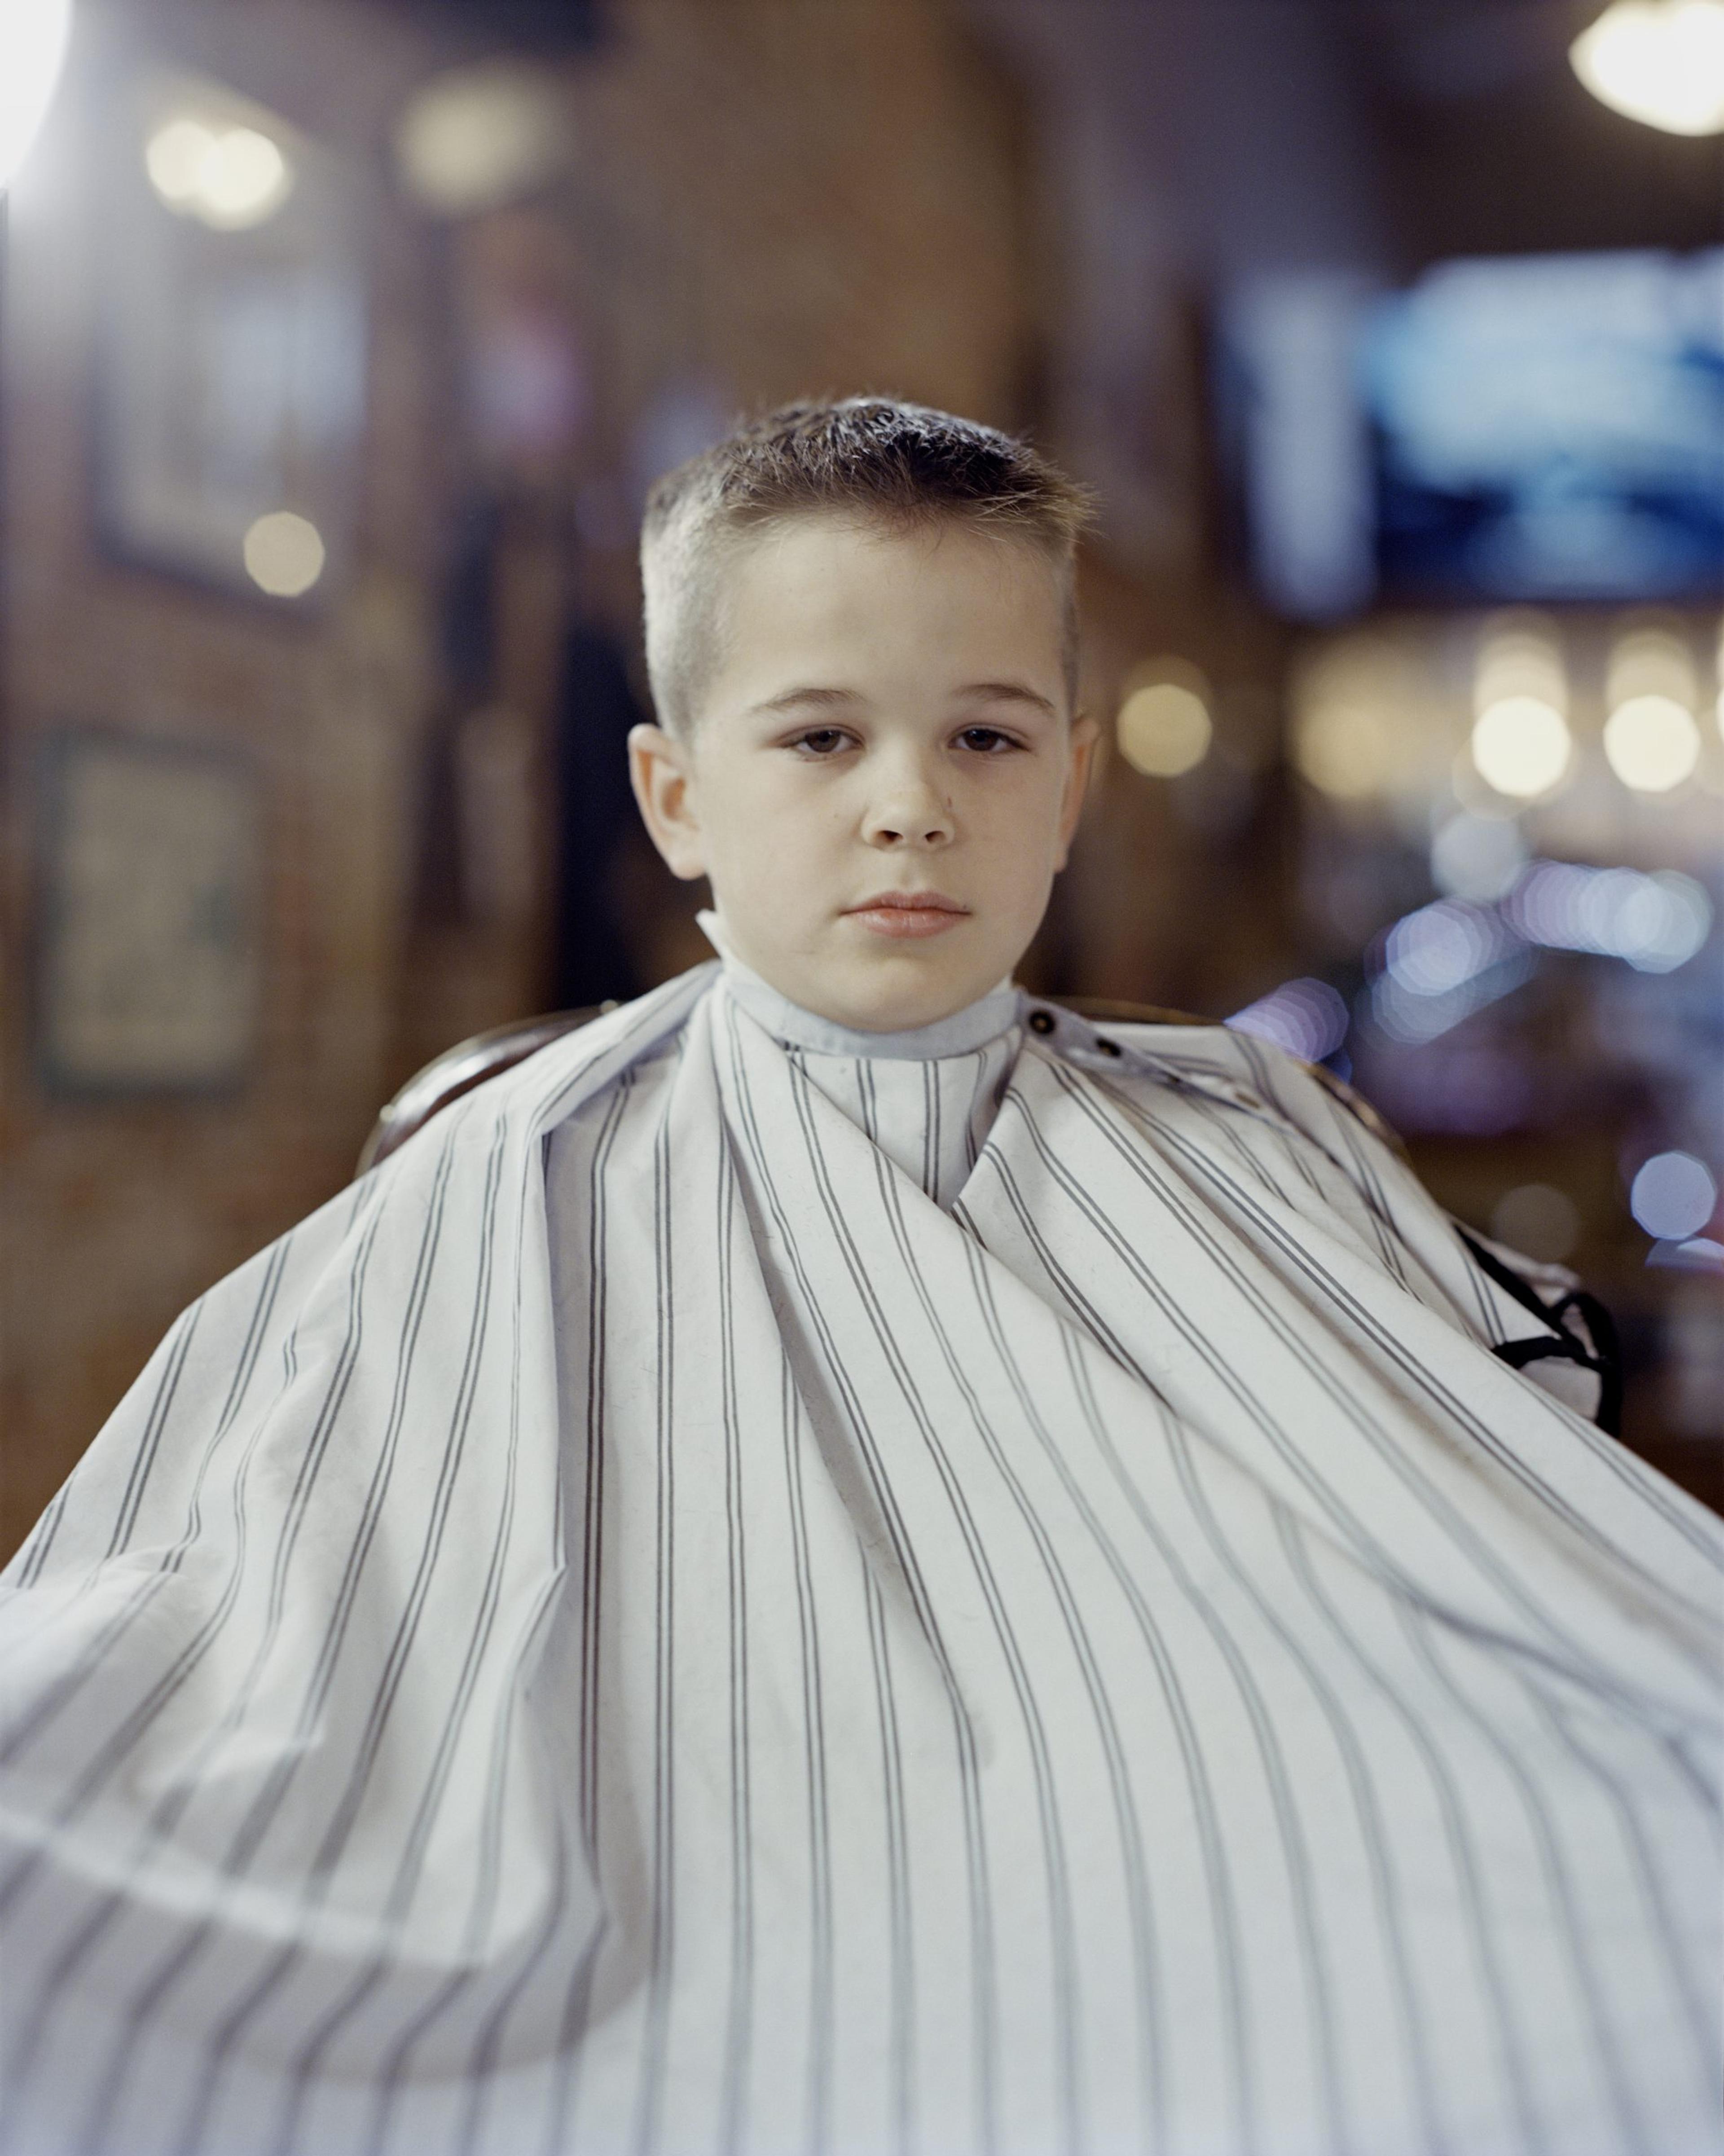 A photograph of a young boy post-haircut, wearing a striped cape.